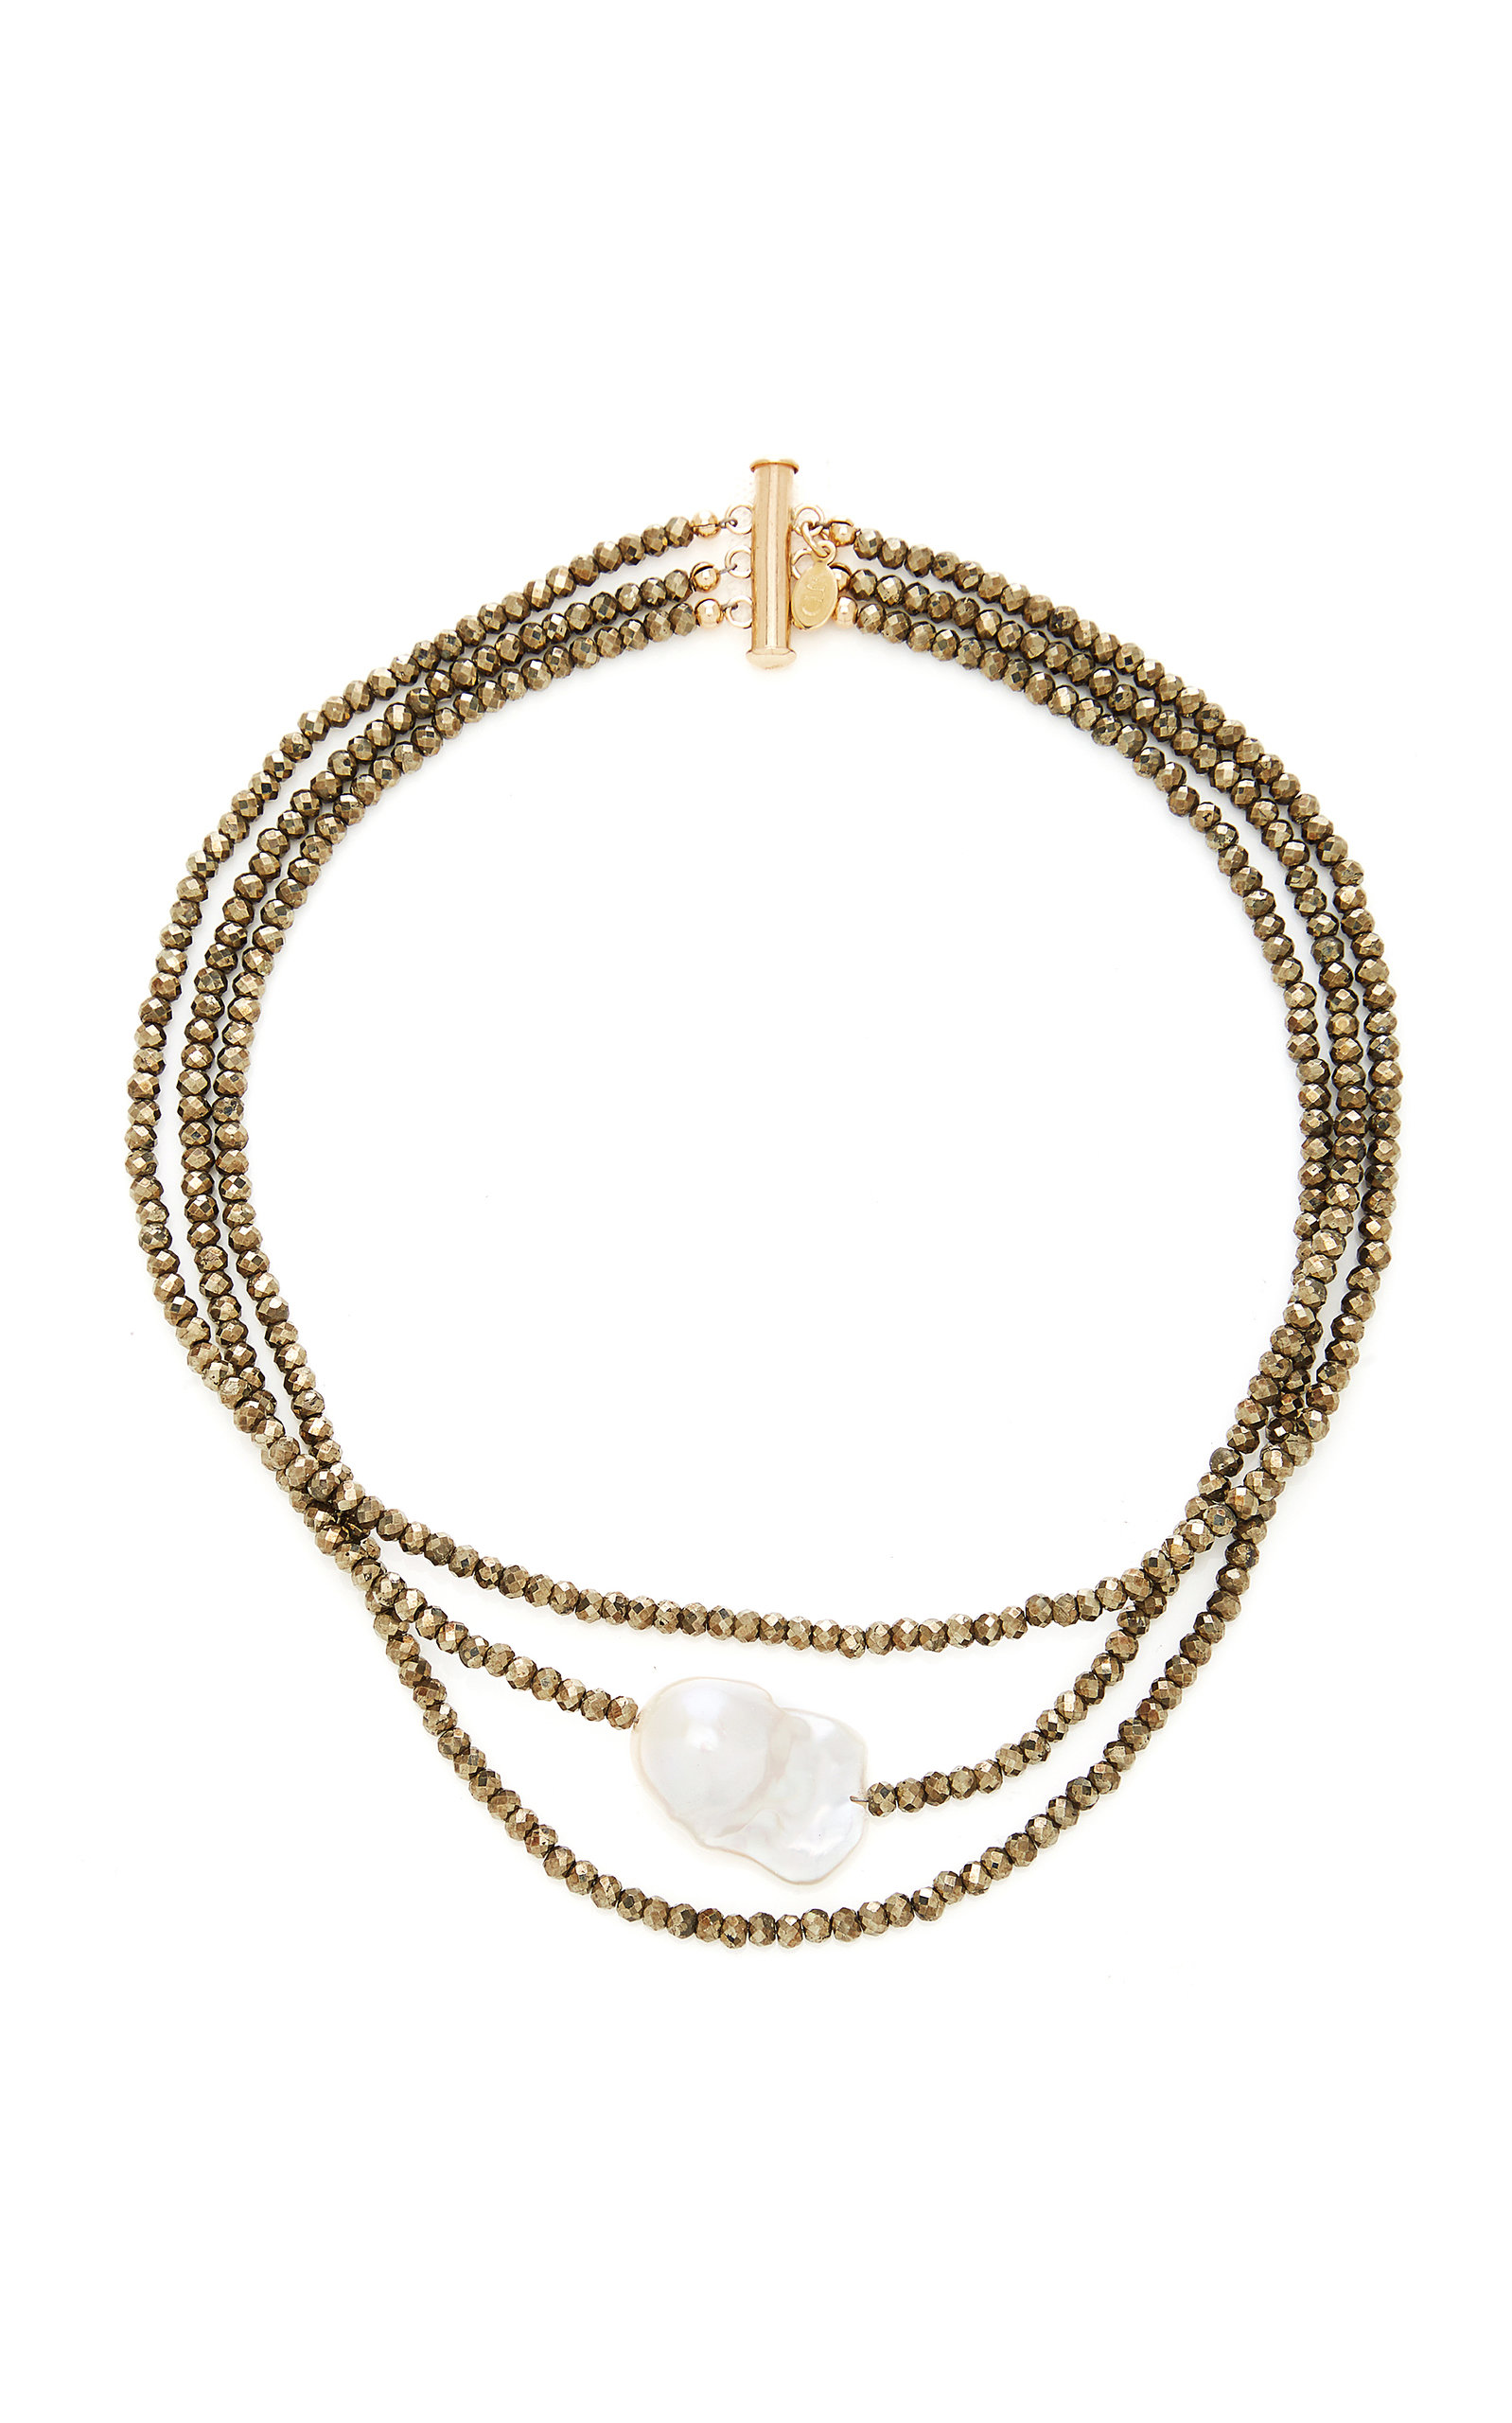 Triple Strand Gold-Filled; Pyrite and Pearl Choker